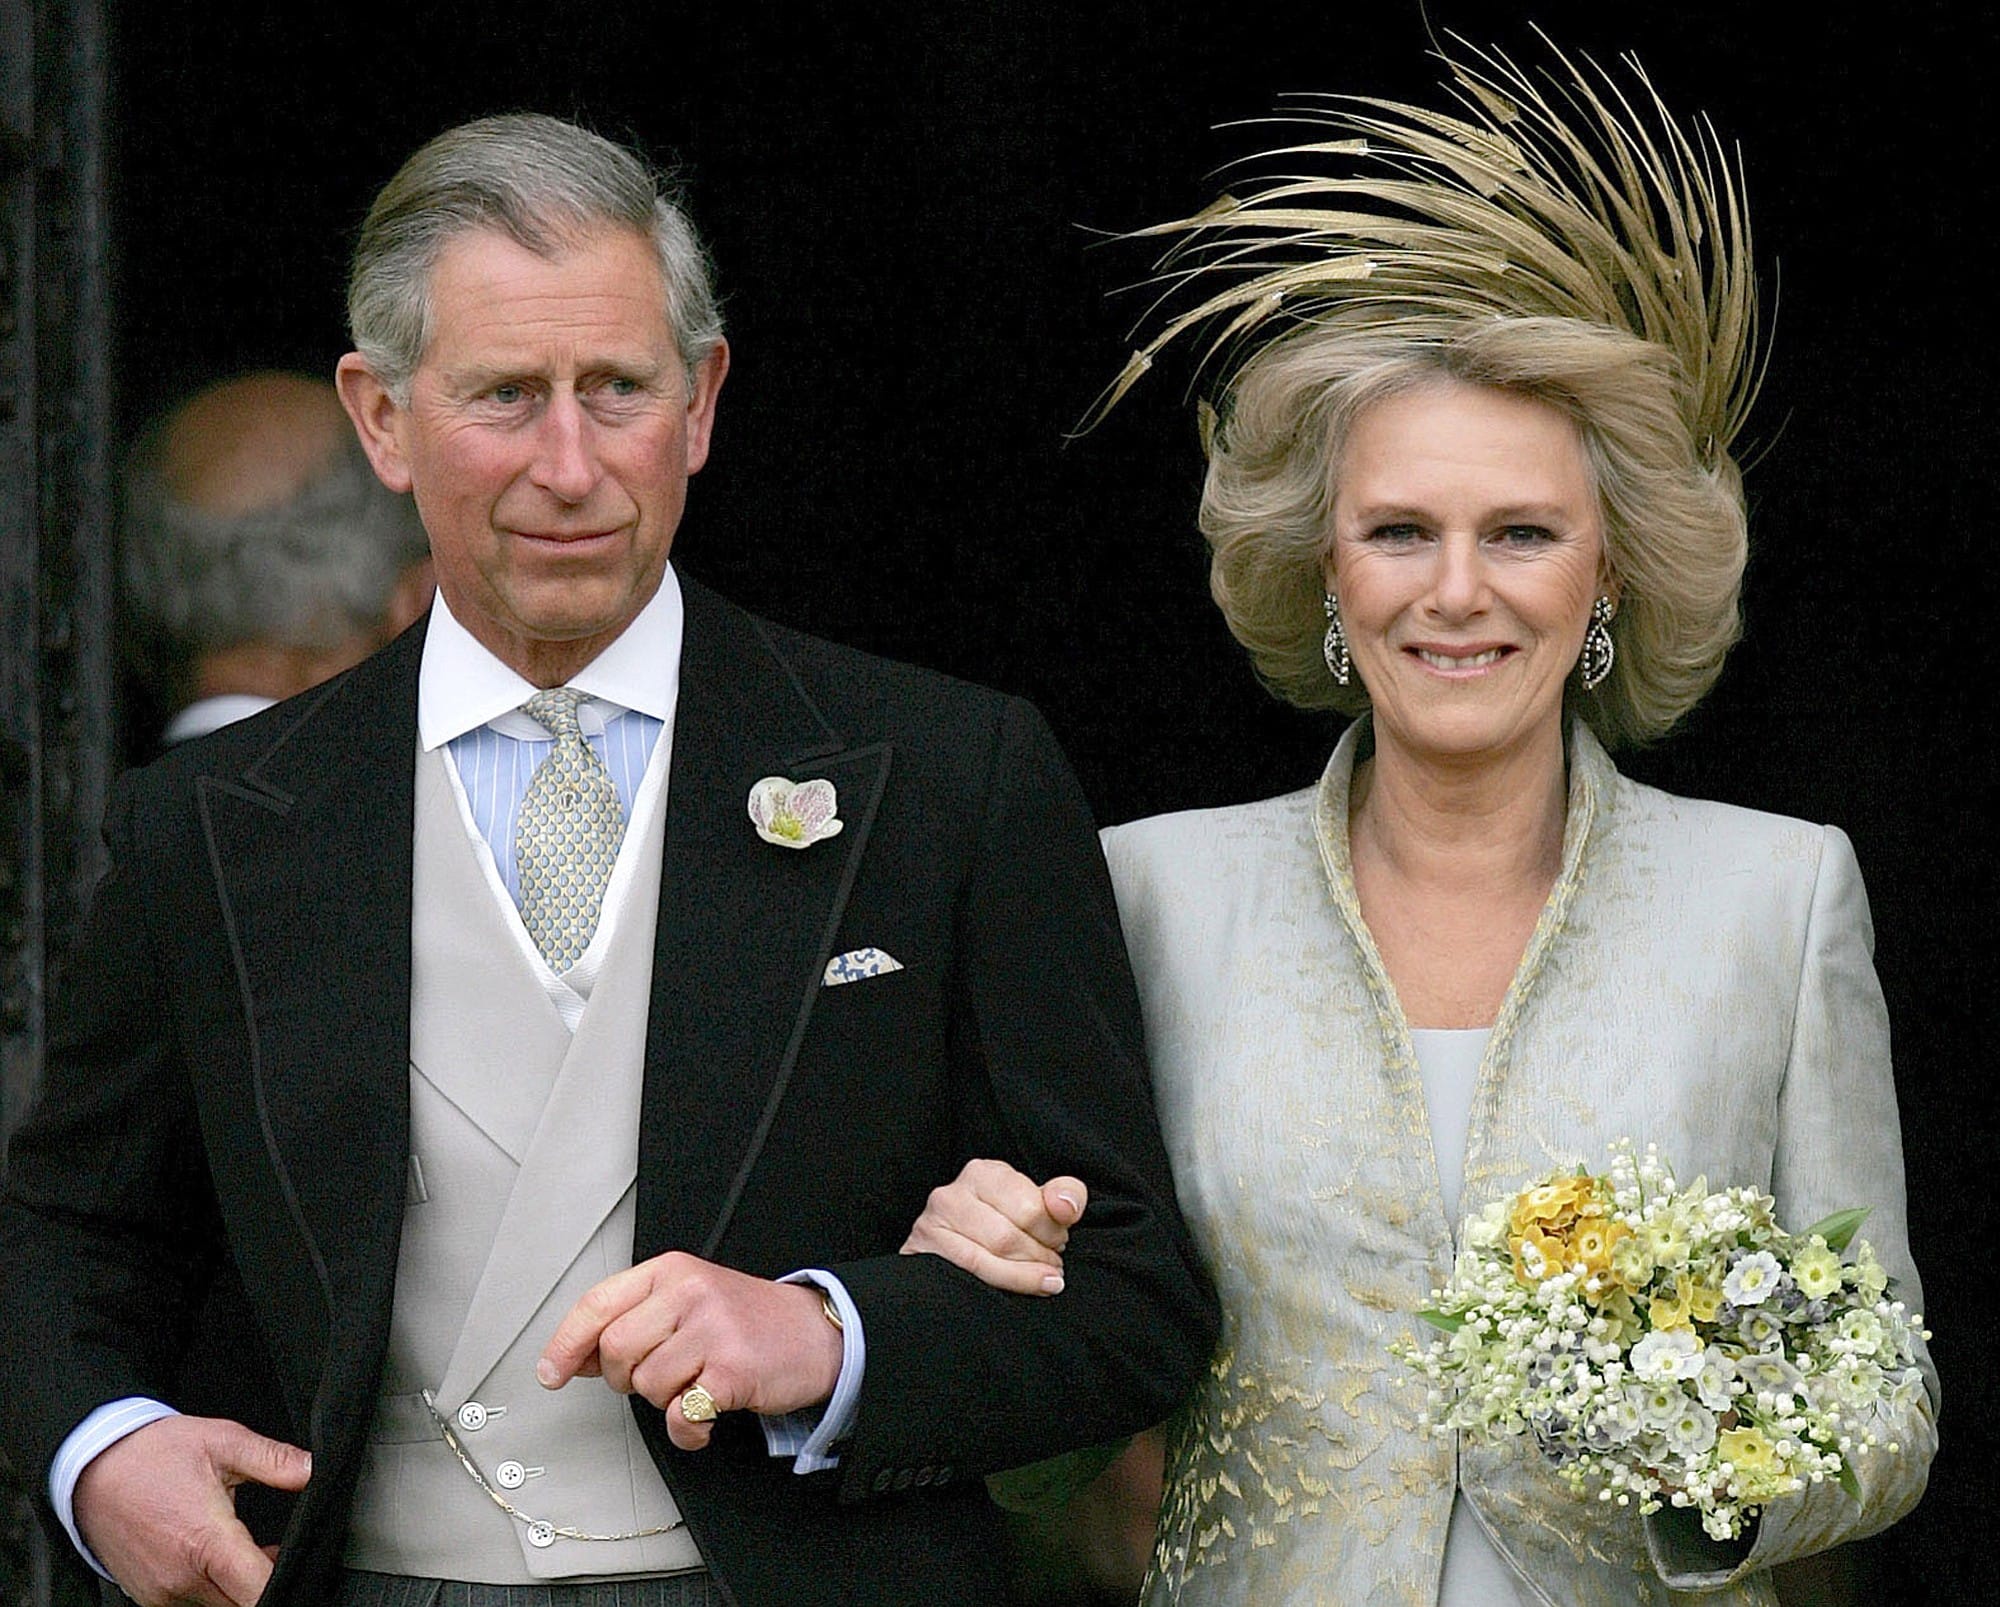 Britain's Prince Charles and his bride Camilla Duchess of Cornwall as they leave St George's Chaple in Windsor, England, following the church blessing of their civil wedding ceremony on April 9, 2005.